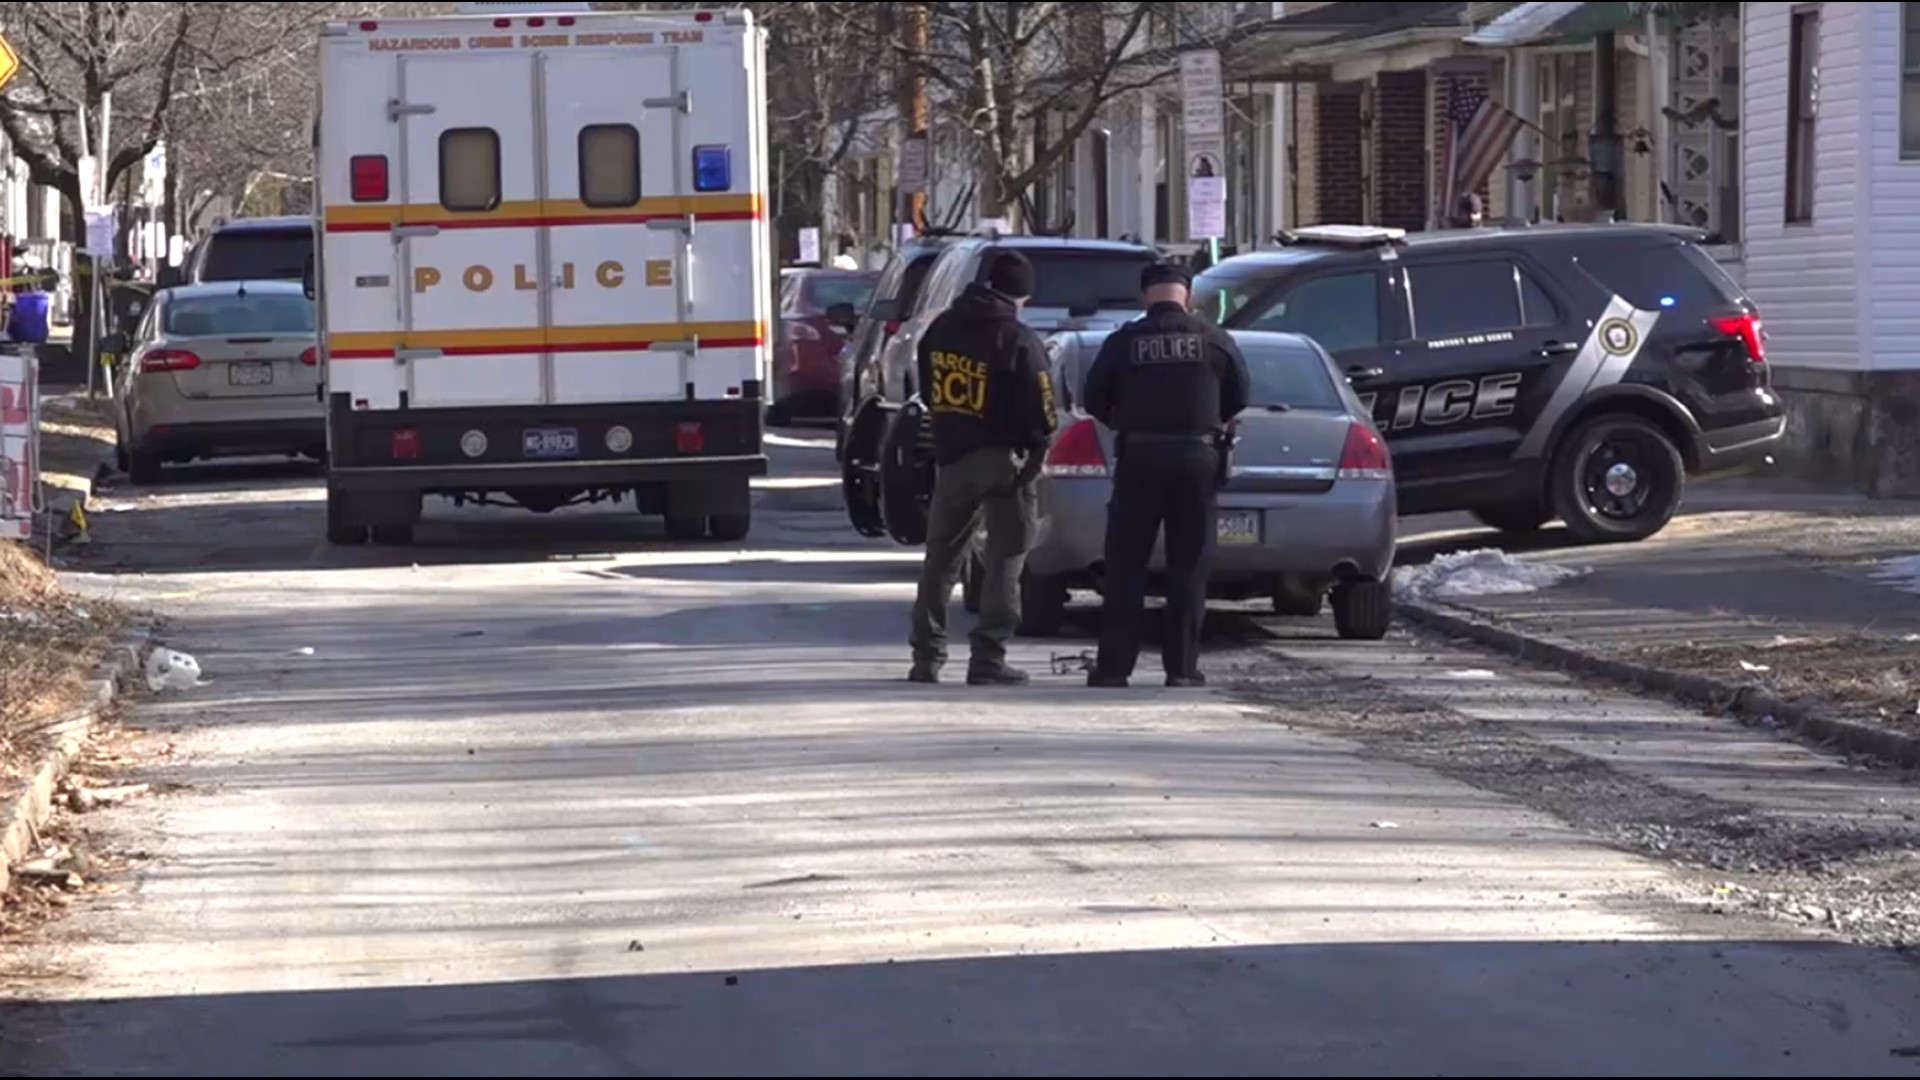 An attacker killed two people and injured three others in Harrisburg on Feb. 9, prompting a wave of calls to action from the community.